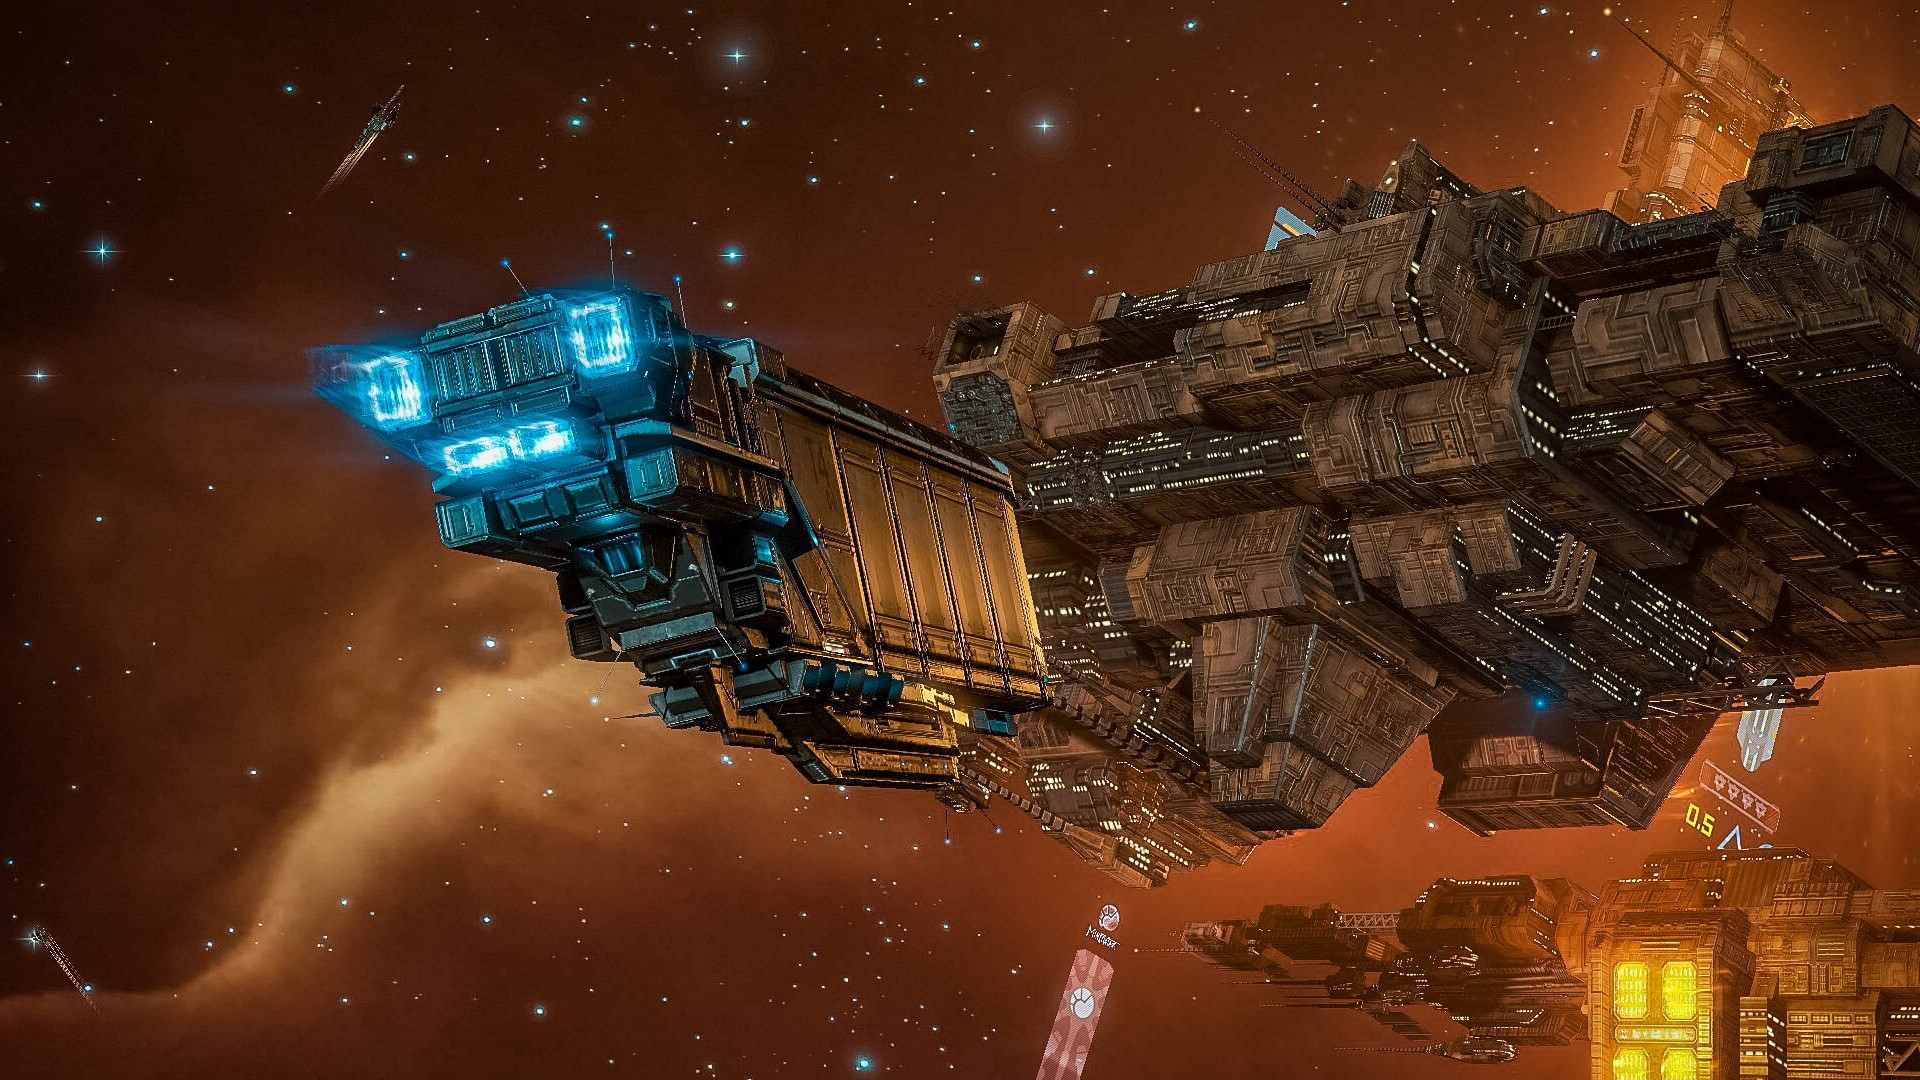 EVE Online roadmap includes expansion plans and Excel integration